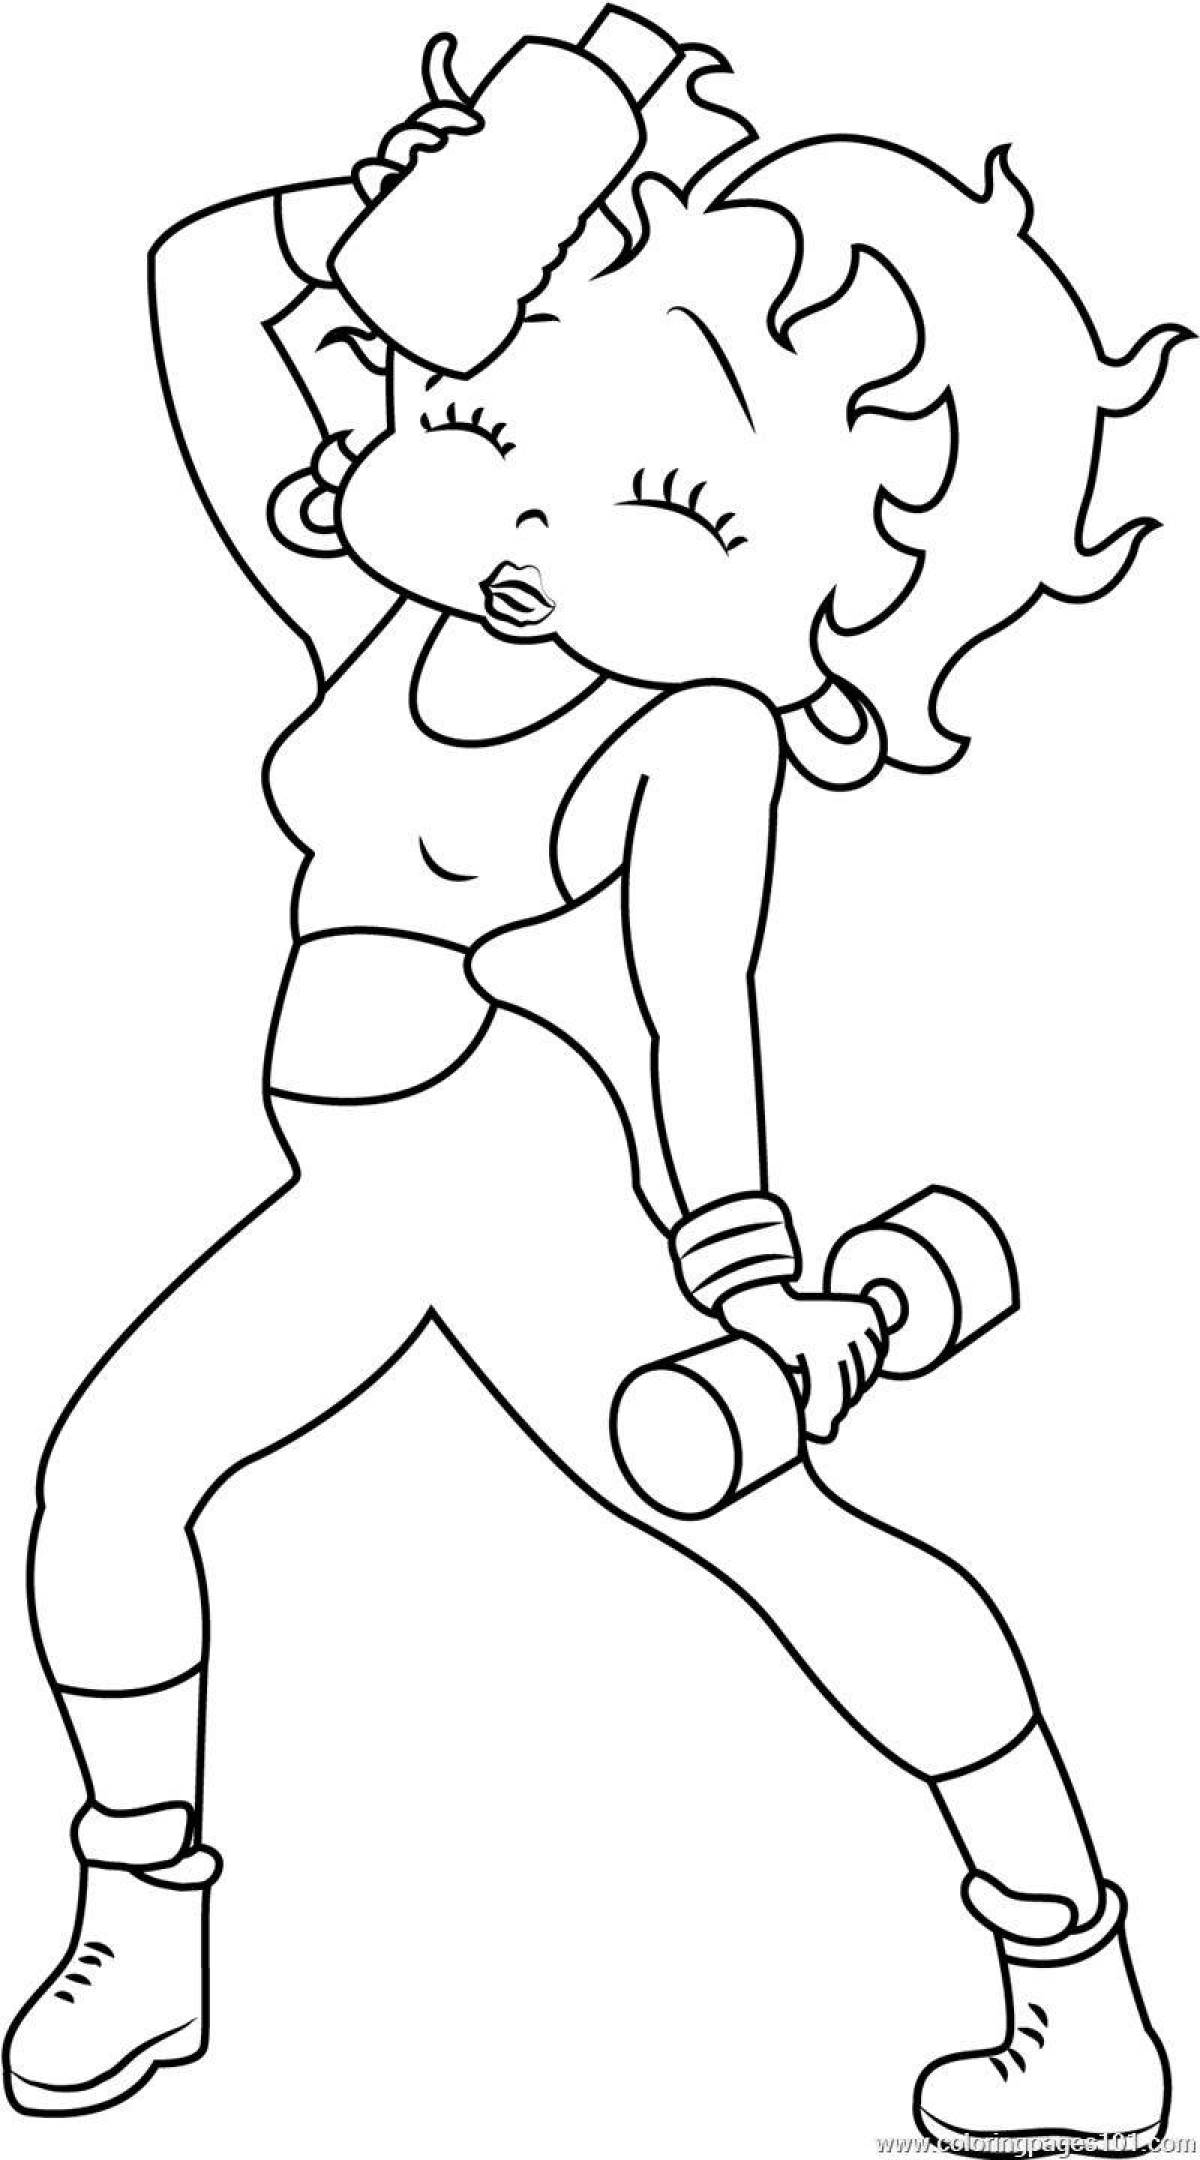 Playful trainer coloring page